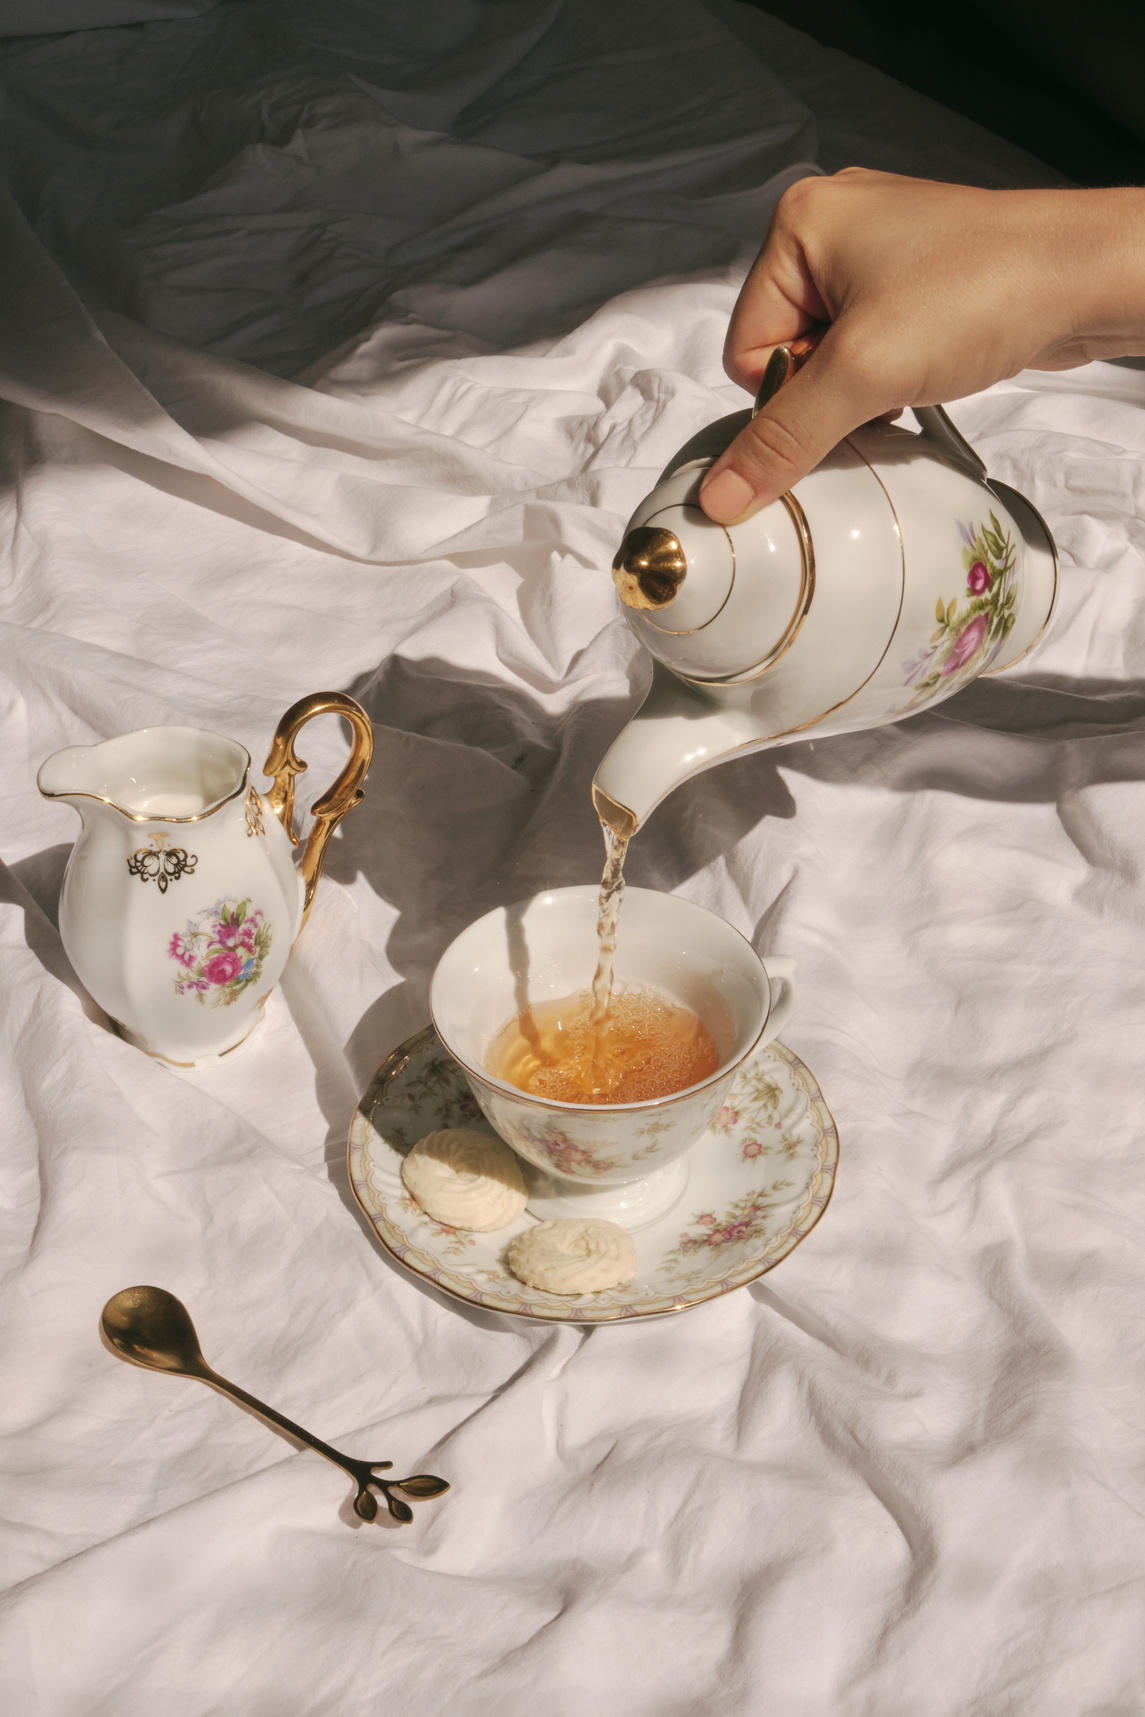 Pouring Tea on Tea Cup